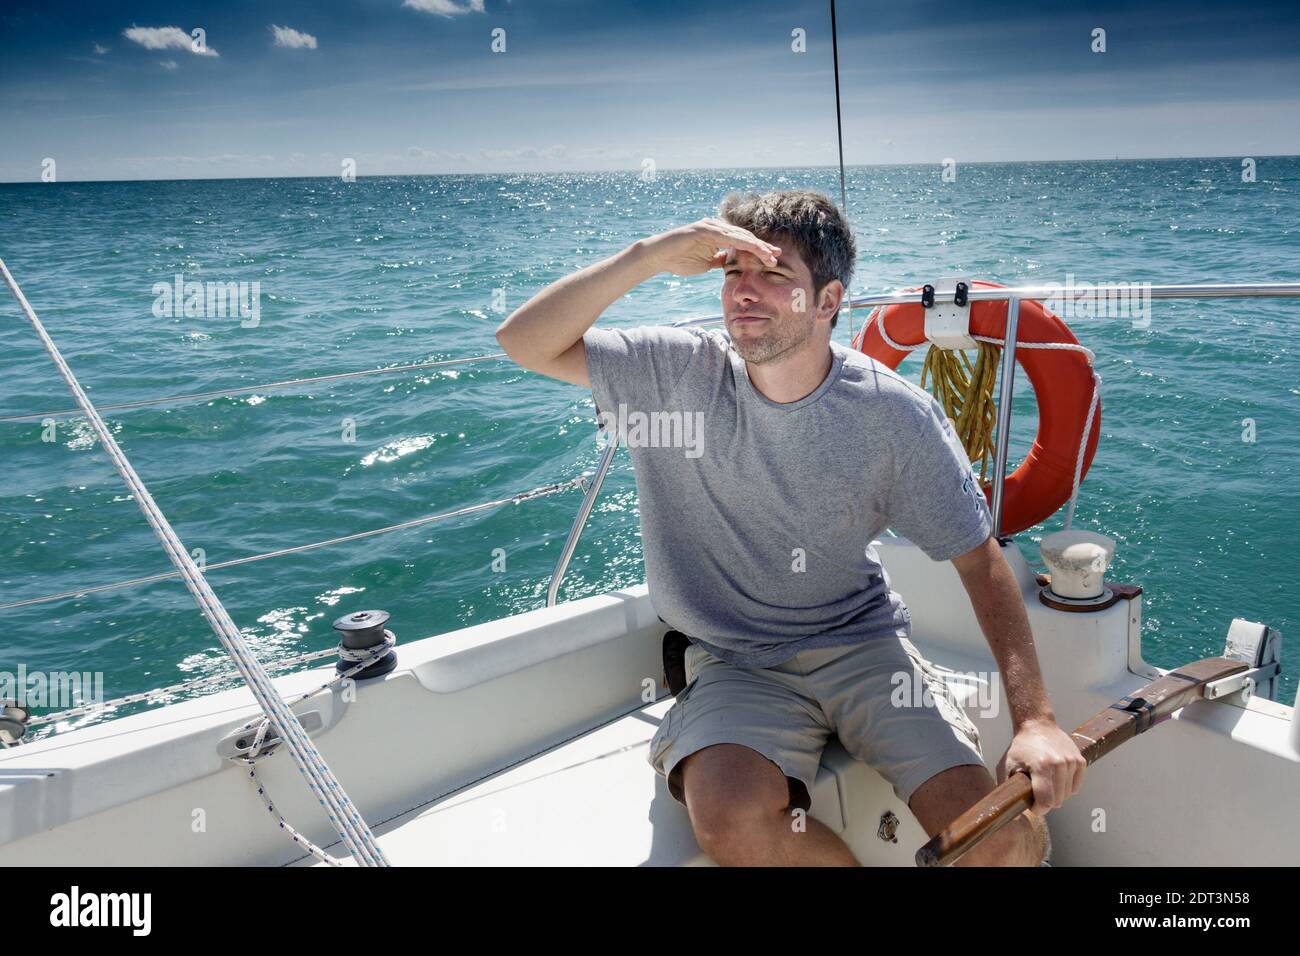 Young man in his late 20's riding a sailboat and looking over the sea for direction. Stock Photo